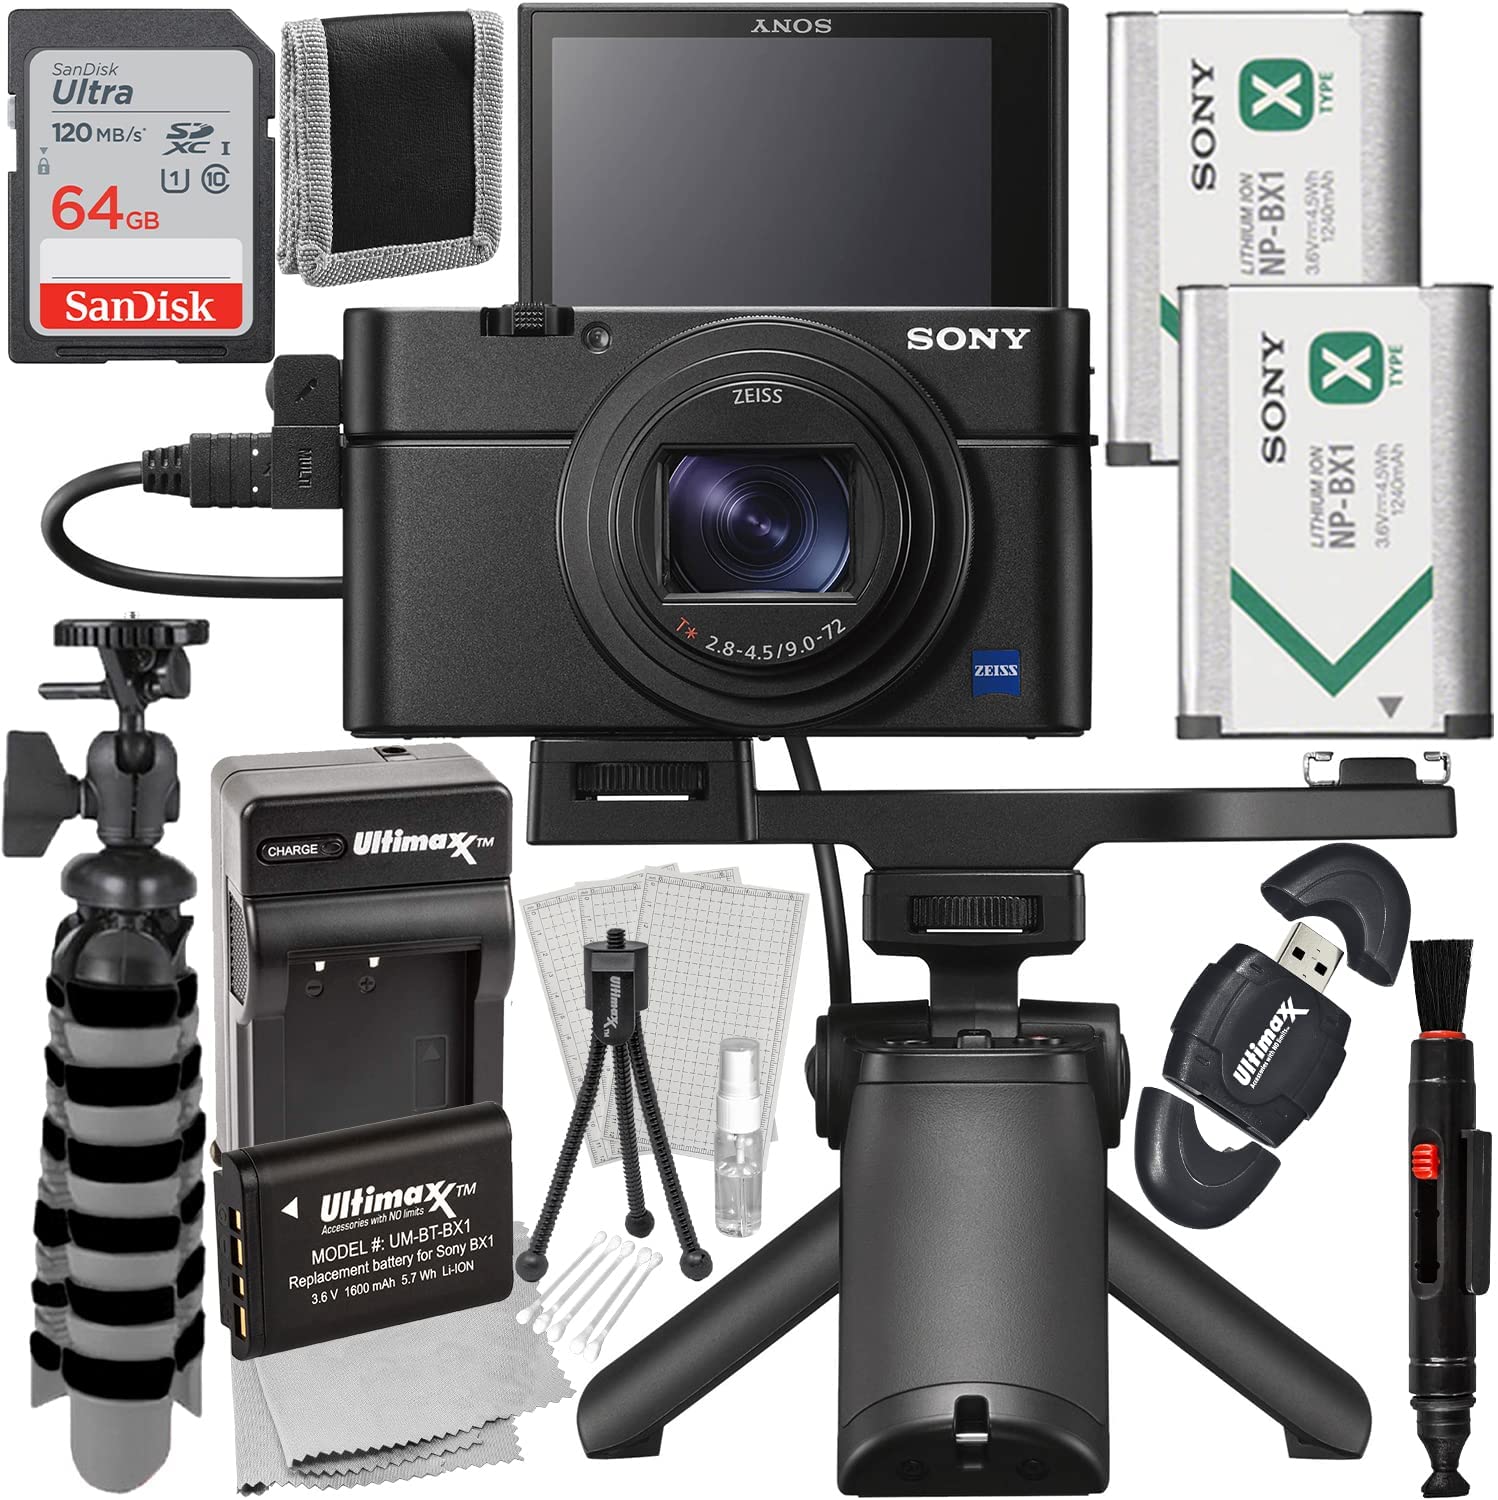 Sony Cyber-Shot DSC-RX100 VII Digital Camera with Shooting Grip Kit + SanDisk 64GB Ultra SDXC Memory Card, Extended Life Replacement Battery, Mini Flexible â??Gripsterâ? Tripod & More (23pc Bundle)